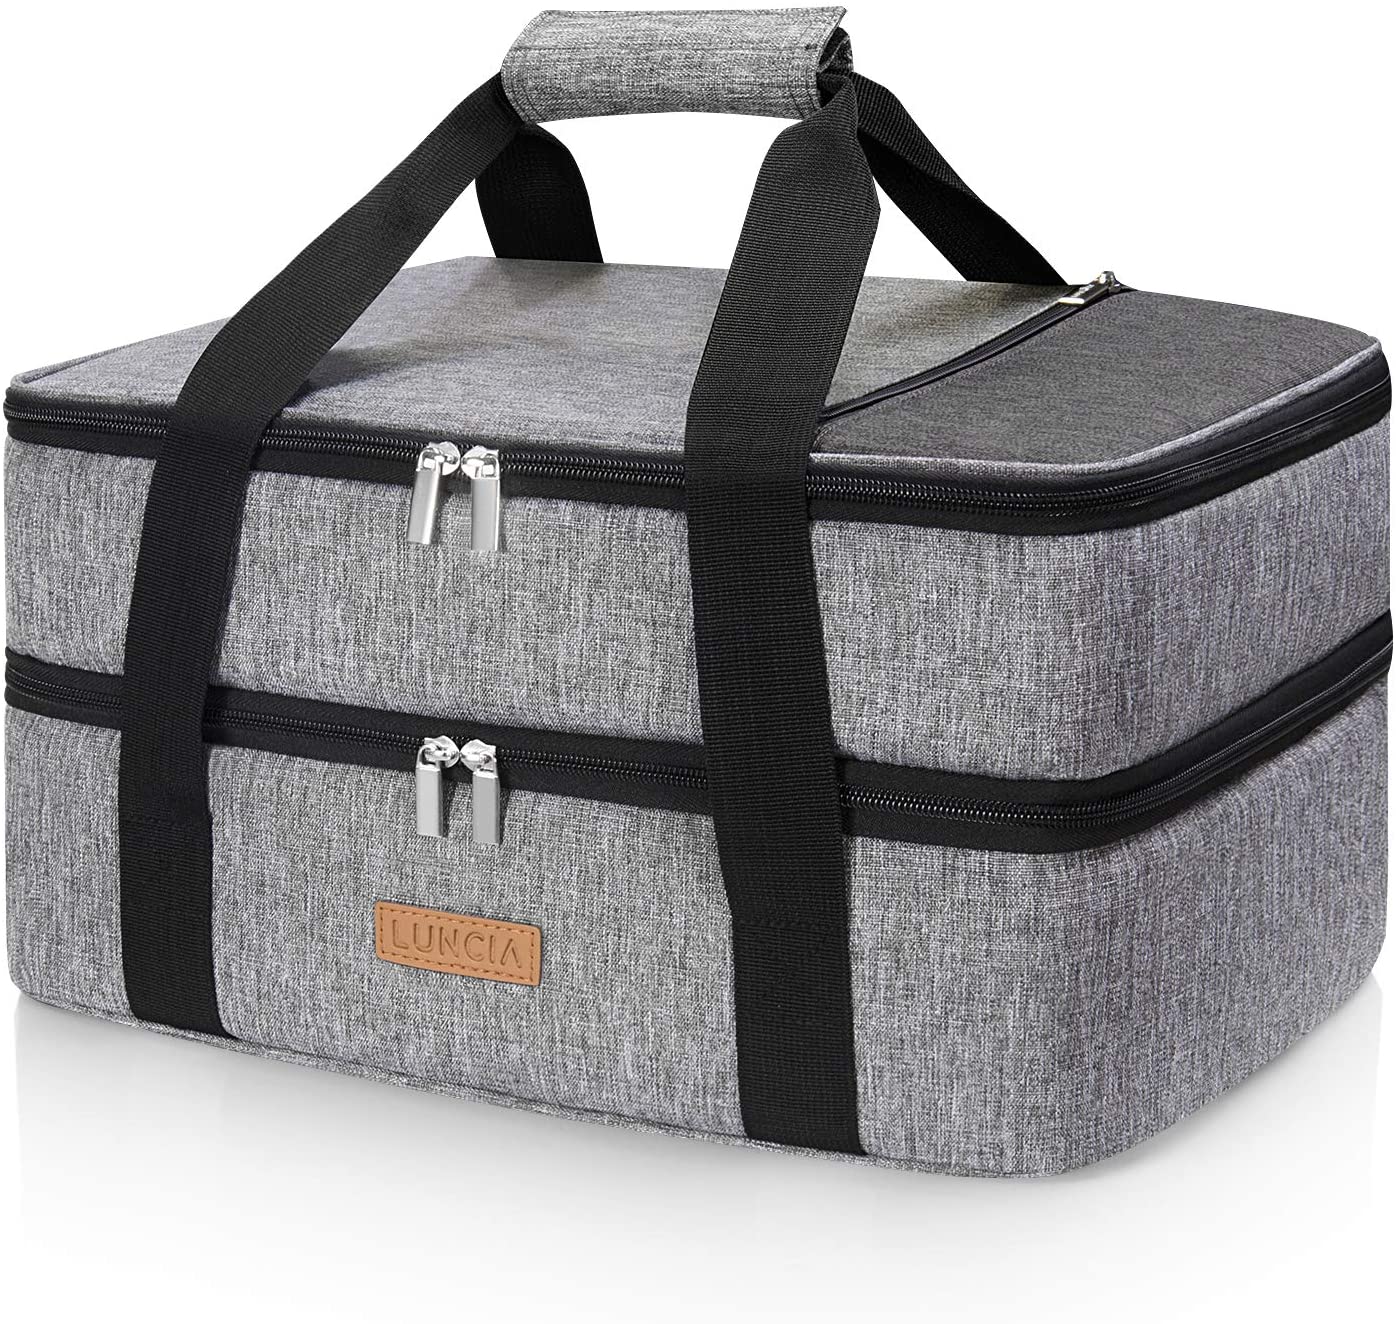 Review of LUNCIA Double Decker Insulated Casserole Carrier for Hot or Cold Food